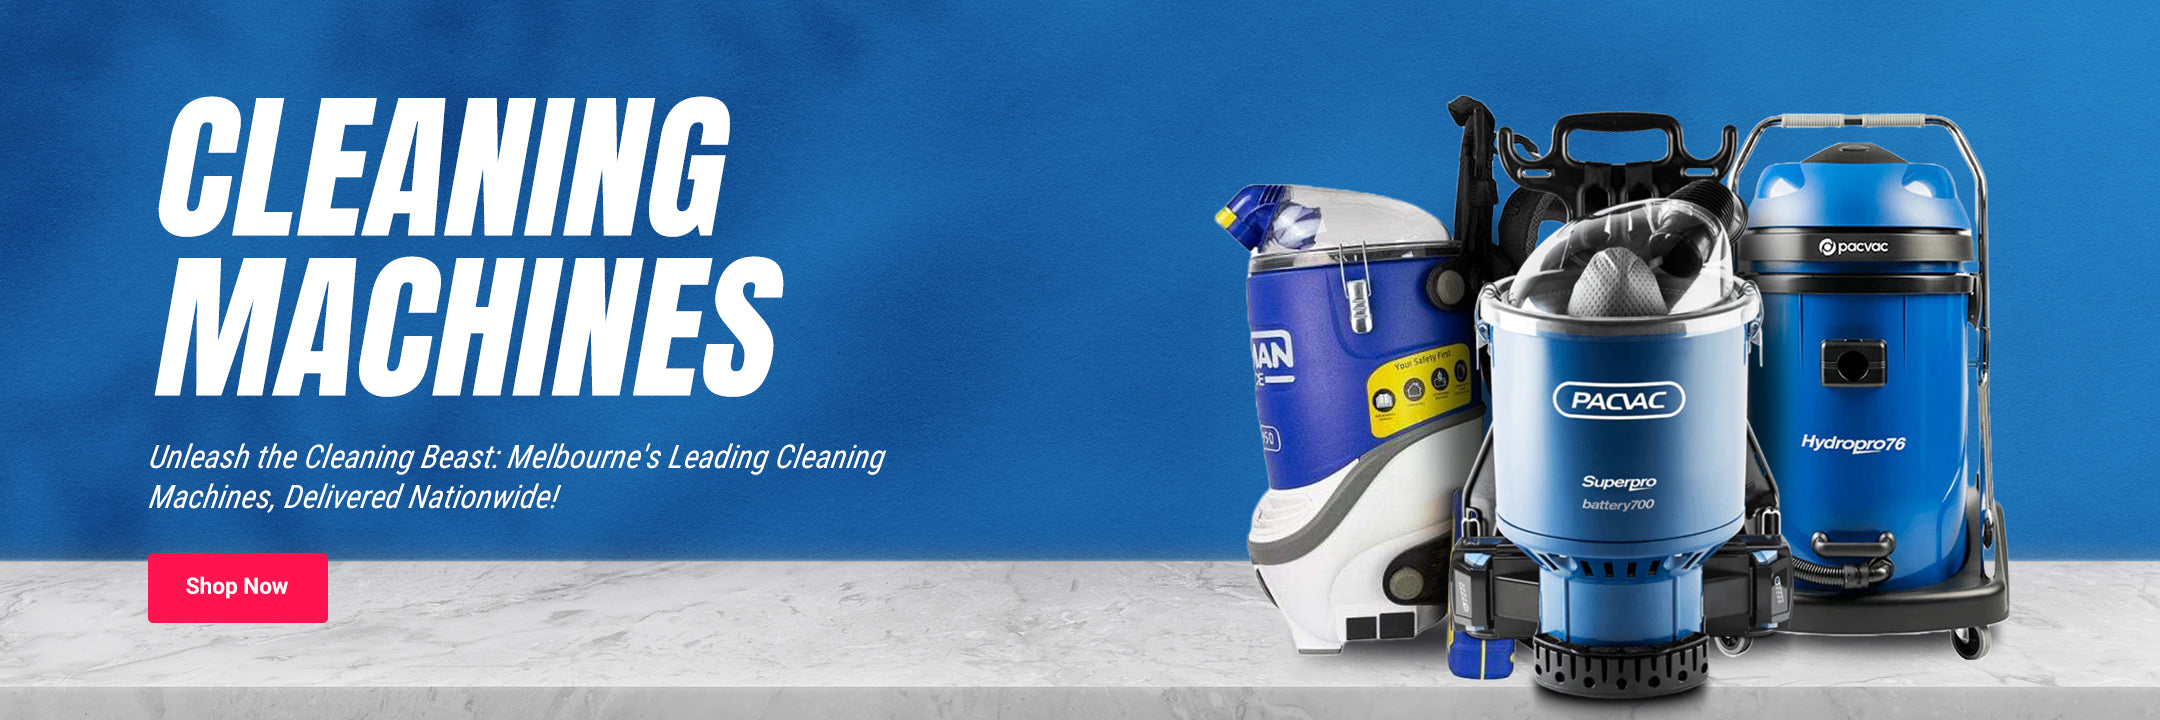 Cleaning Vacuums and Machines